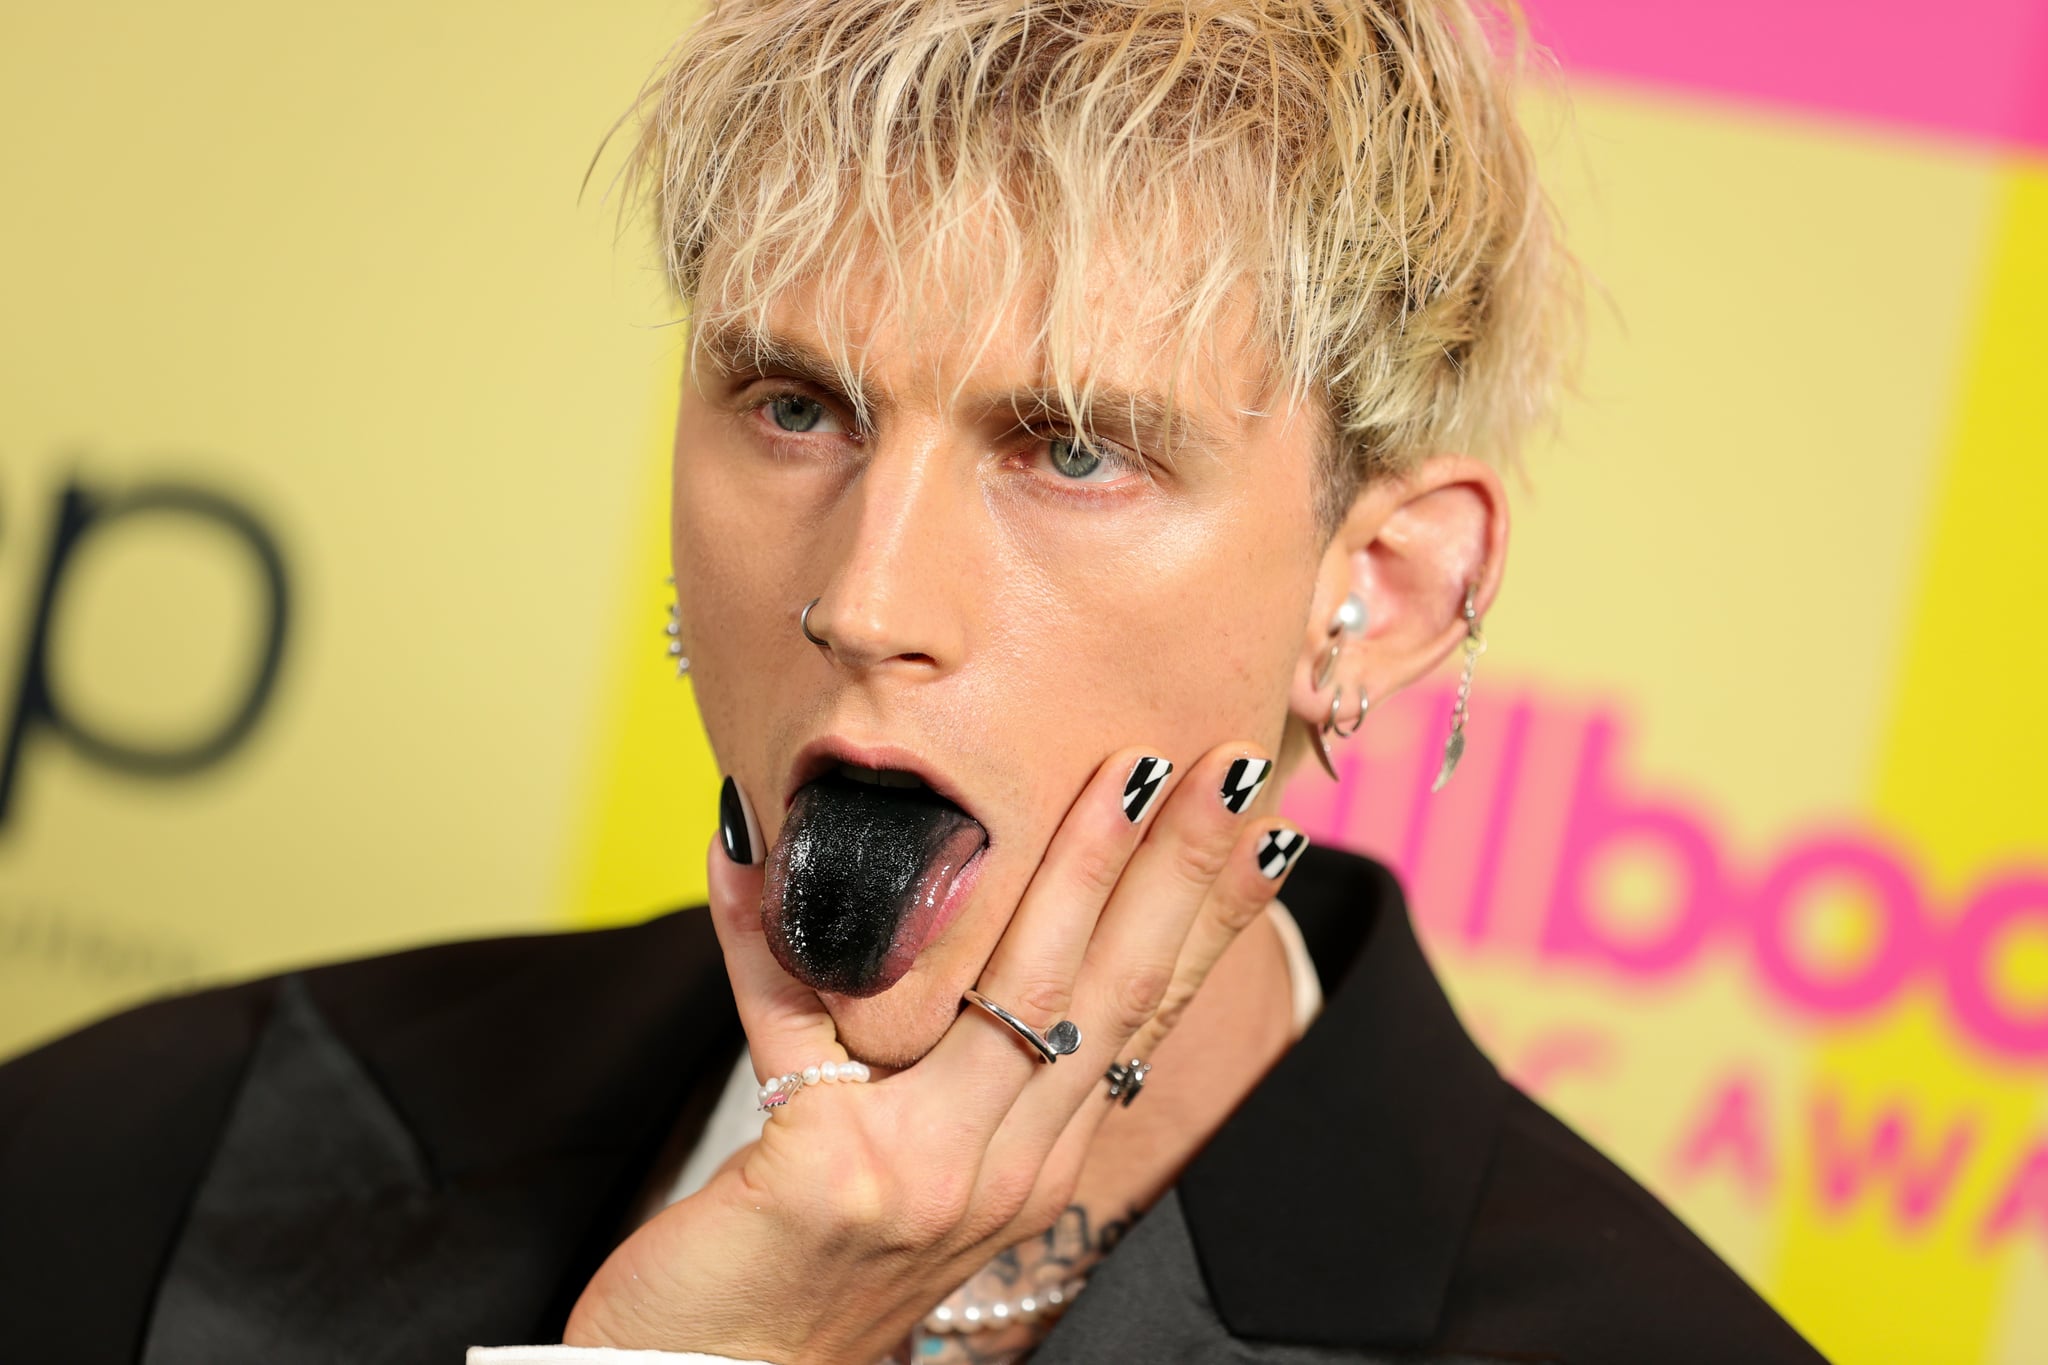 LOS ANGELES, CALIFORNIA - MAY 23: Machine Gun Kelly poses backstage for the 2021 Billboard Music Awards, broadcast on May 23, 2021 at Microsoft Theater in Los Angeles, California. (Photo by Rich Fury/Getty Images for dcp)